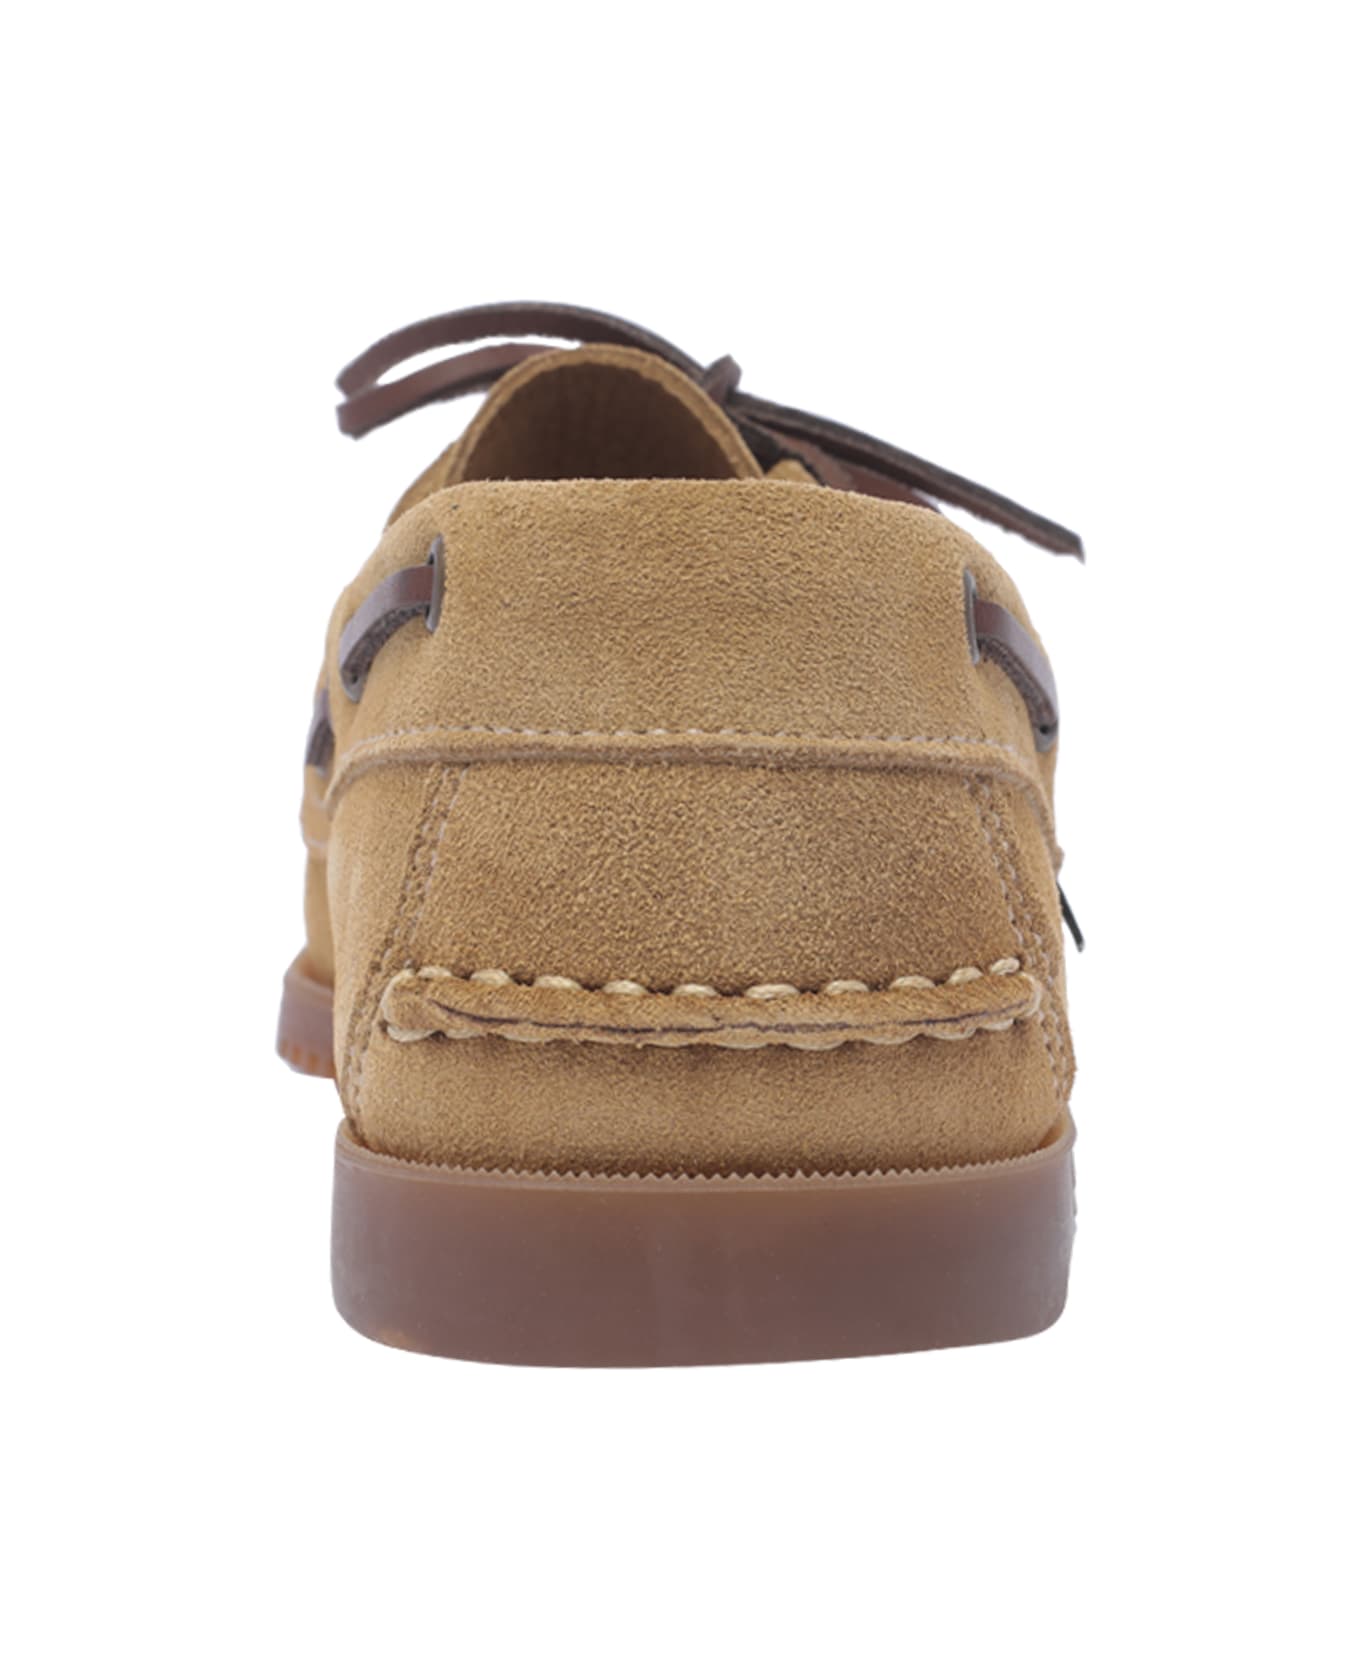 Paraboot Barth Loafers - Brown